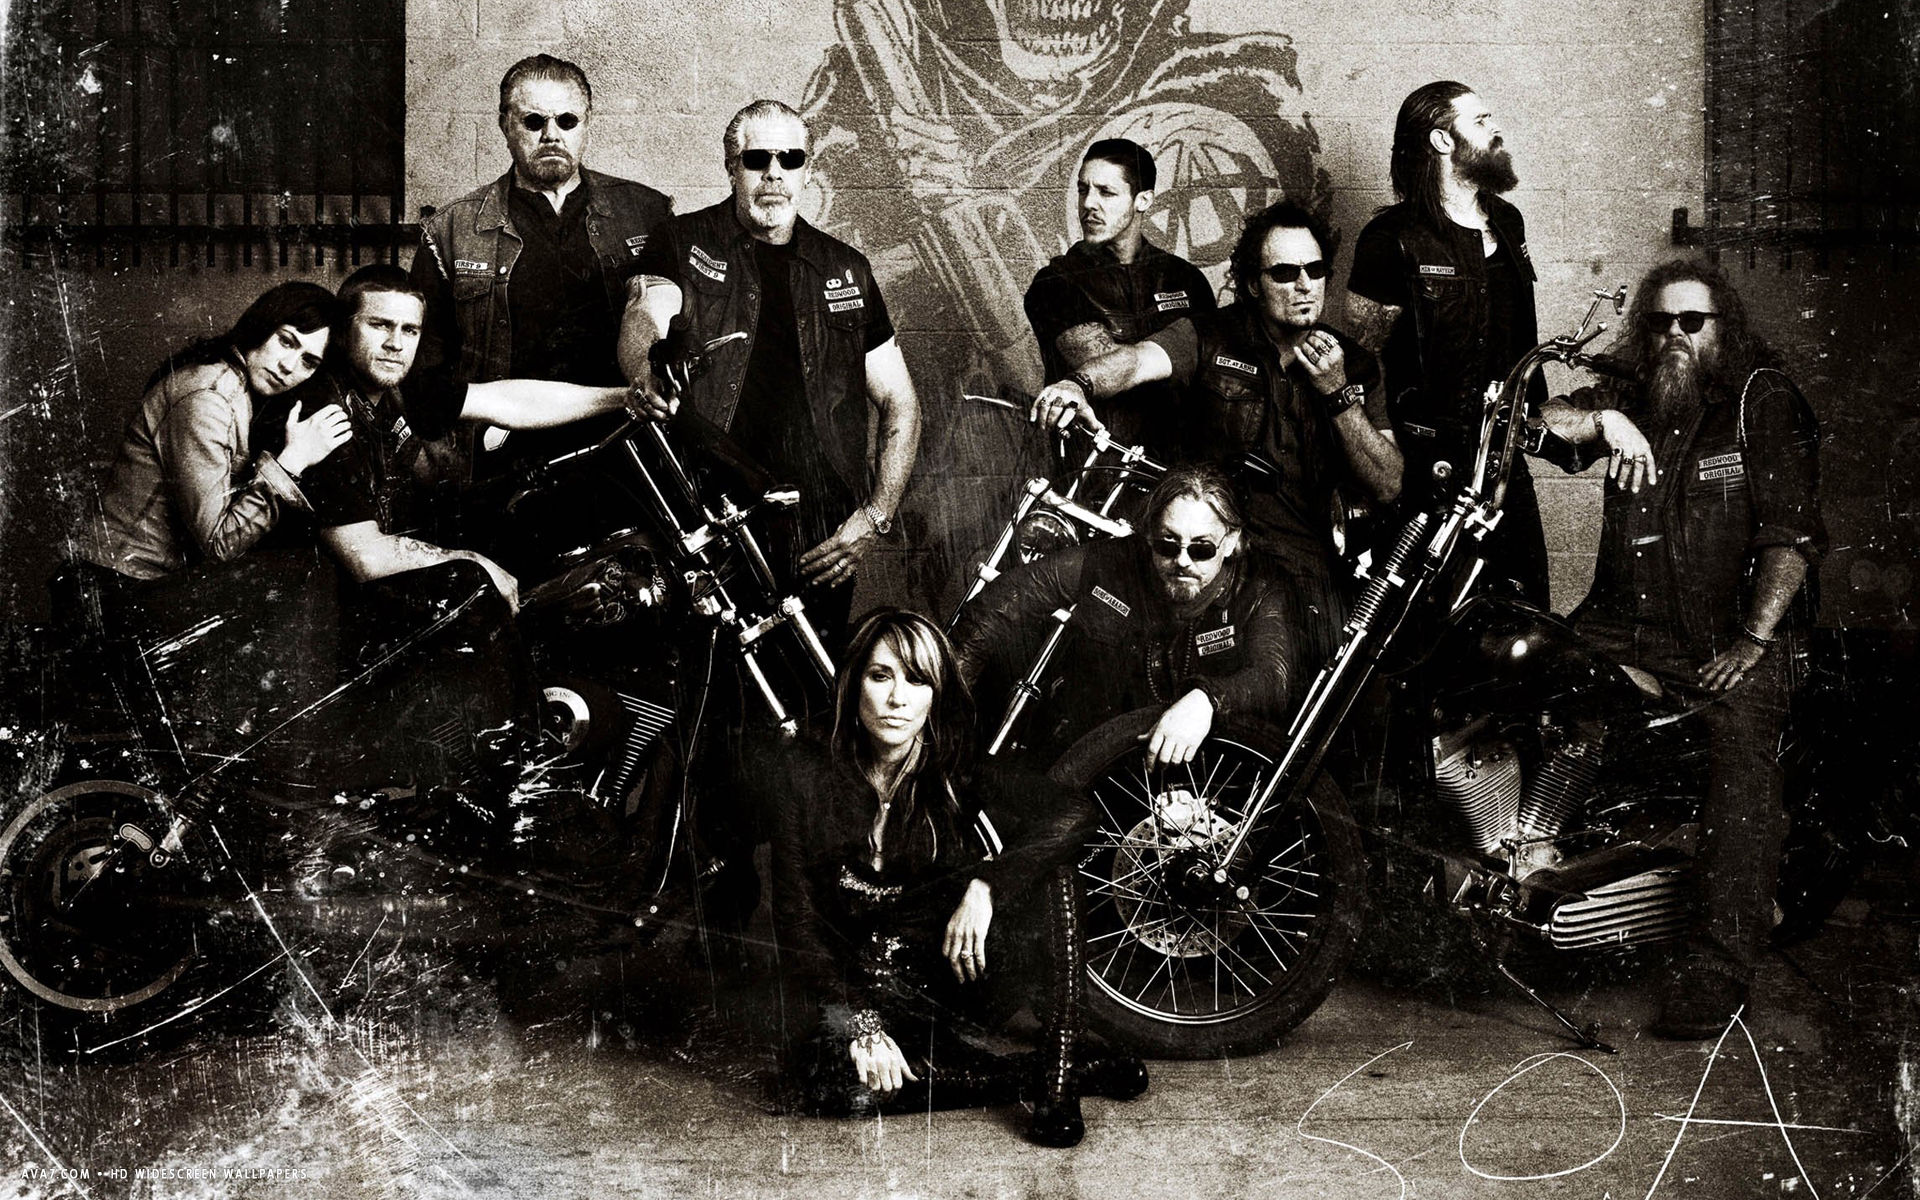 Sons Of Anarchy  HD wallpapers, Desktop wallpaper - most viewed